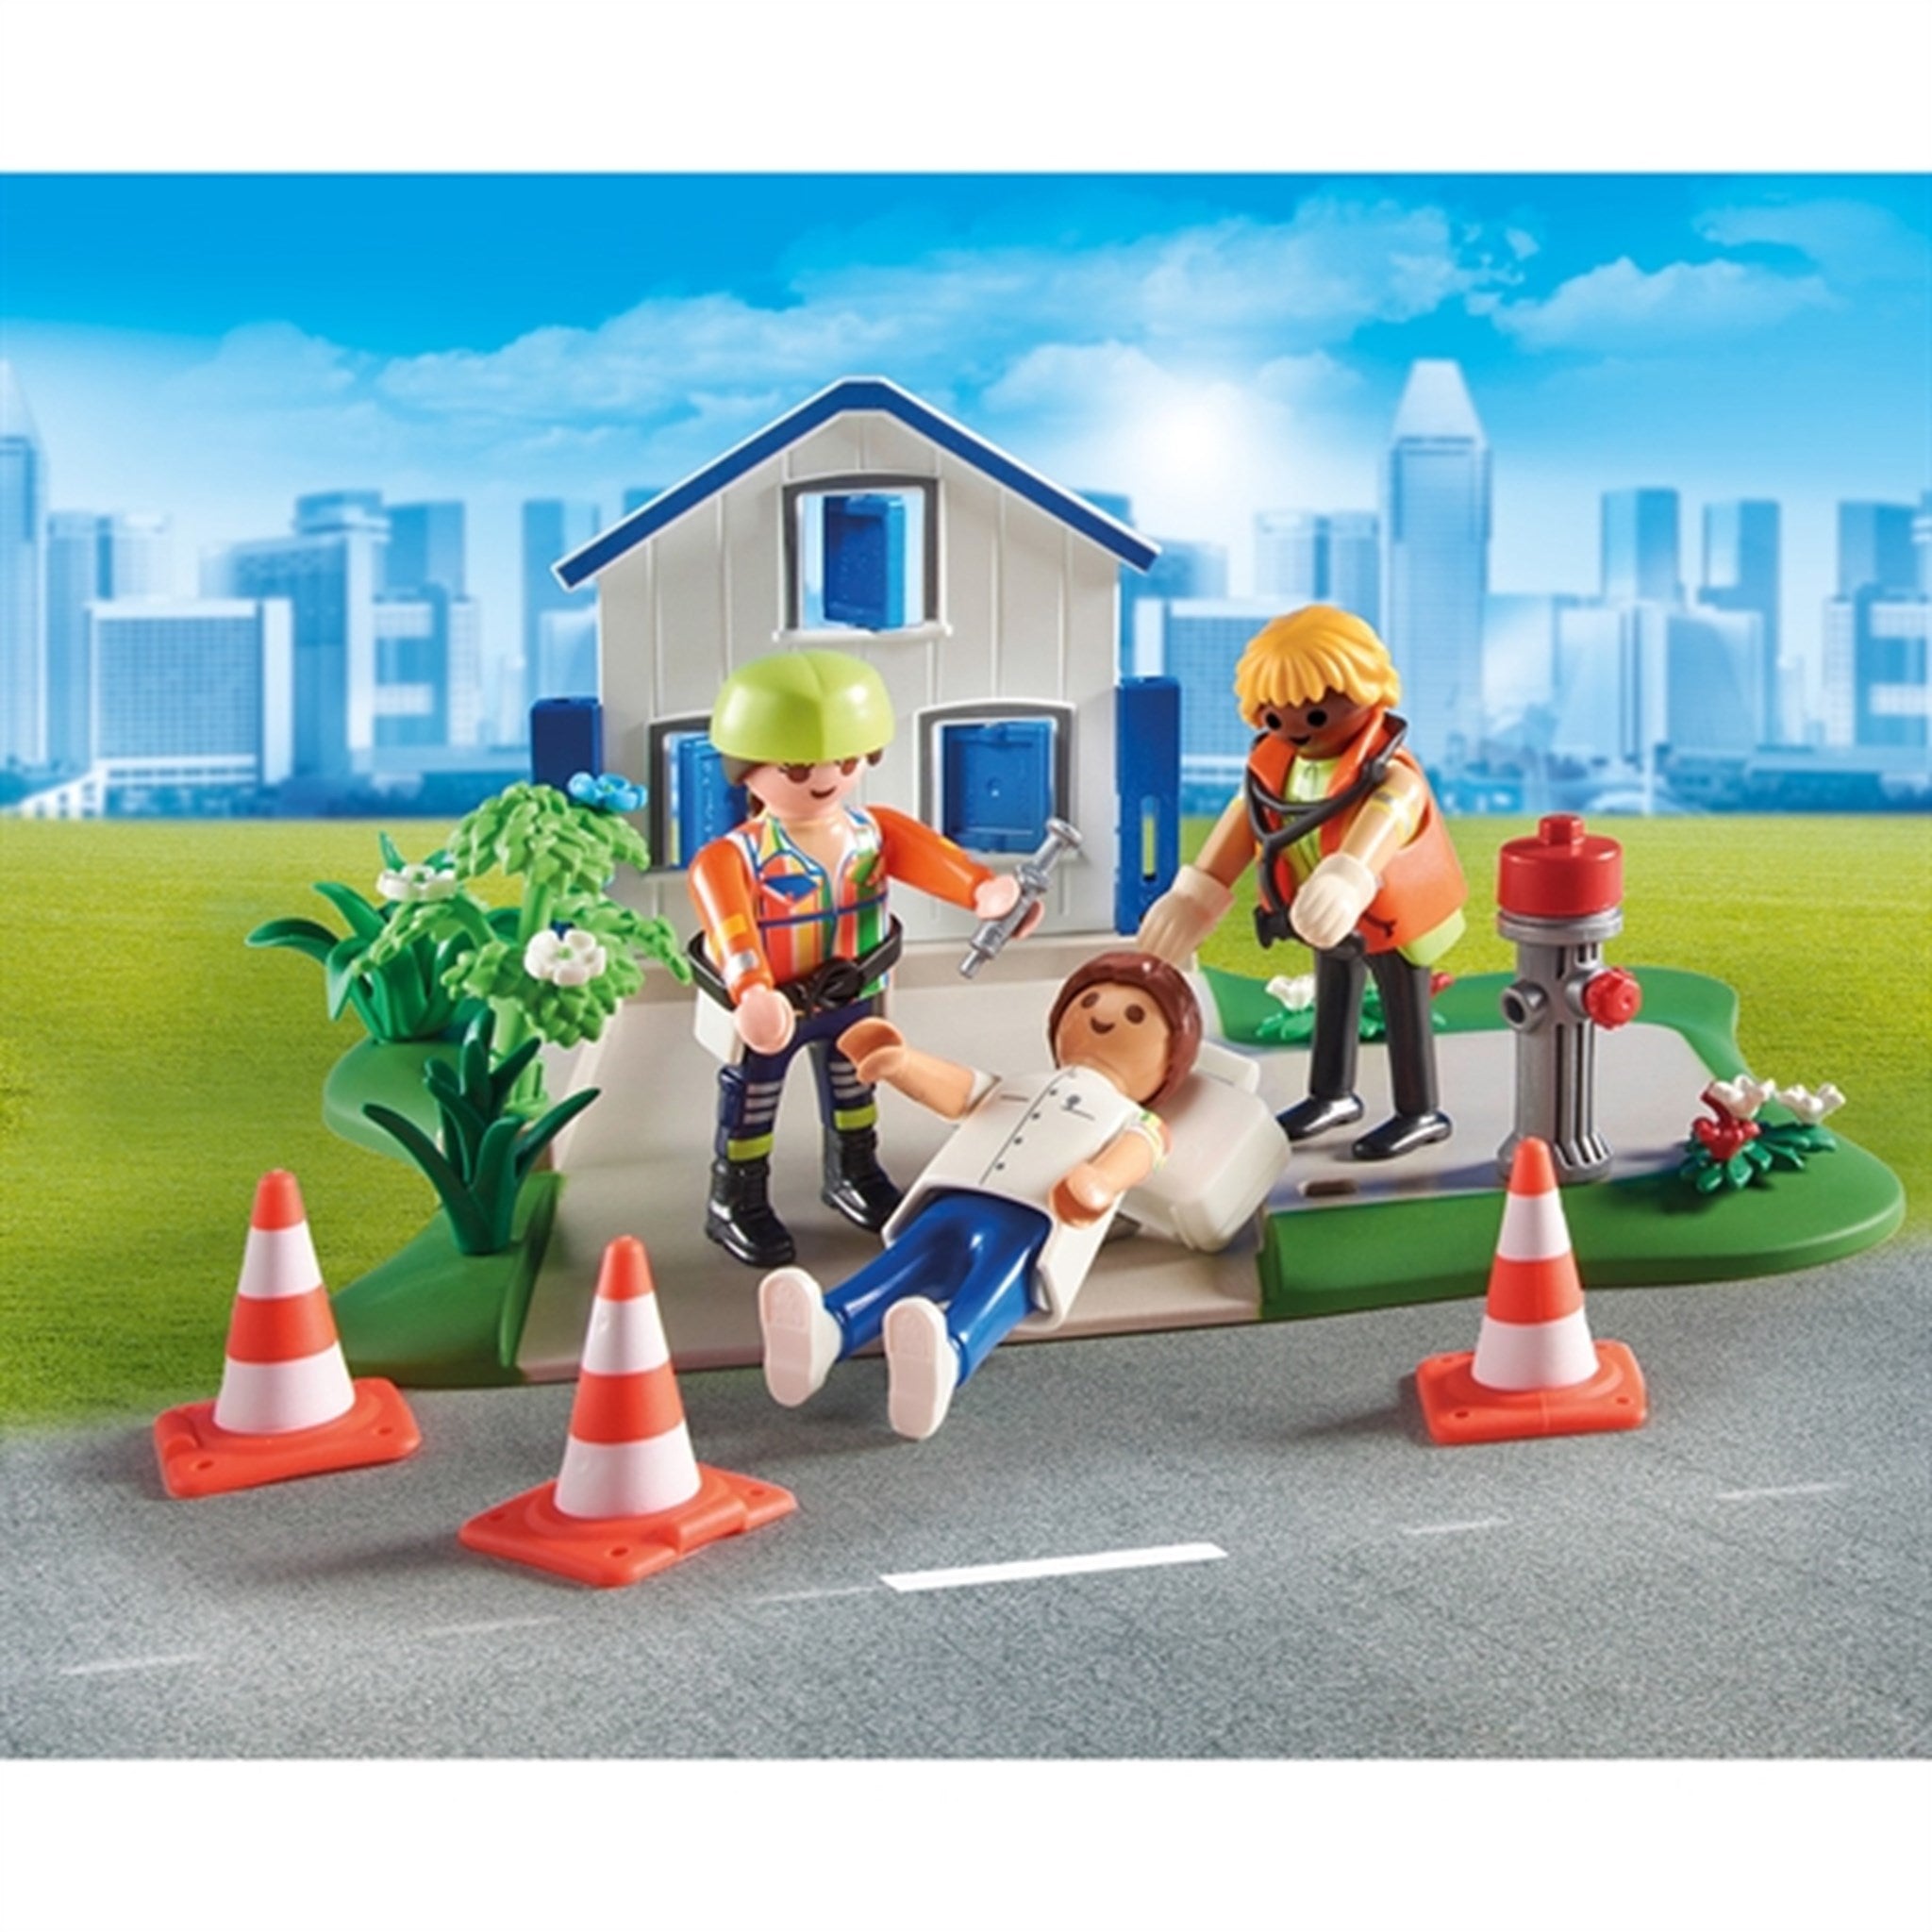 Playmobil® Figures - My Figures: Rescue Mission 2